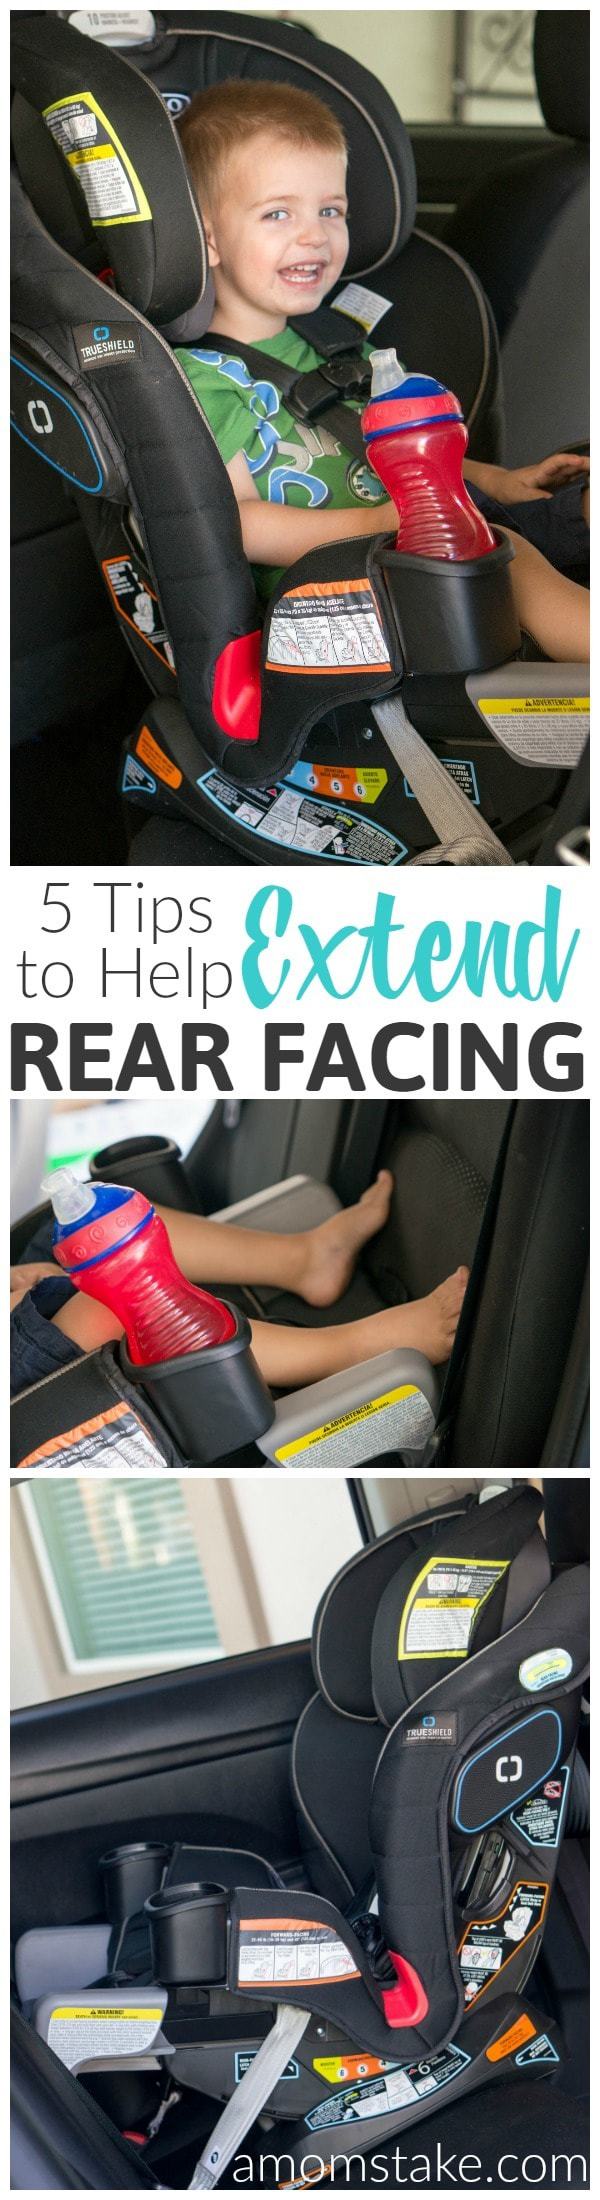 These 5 easy tips will help moms and dads keep your baby and toddlers rear facing longer! It's best to extend rear-facing in their car seat as long as the car seat limits allow to keep your children safe!